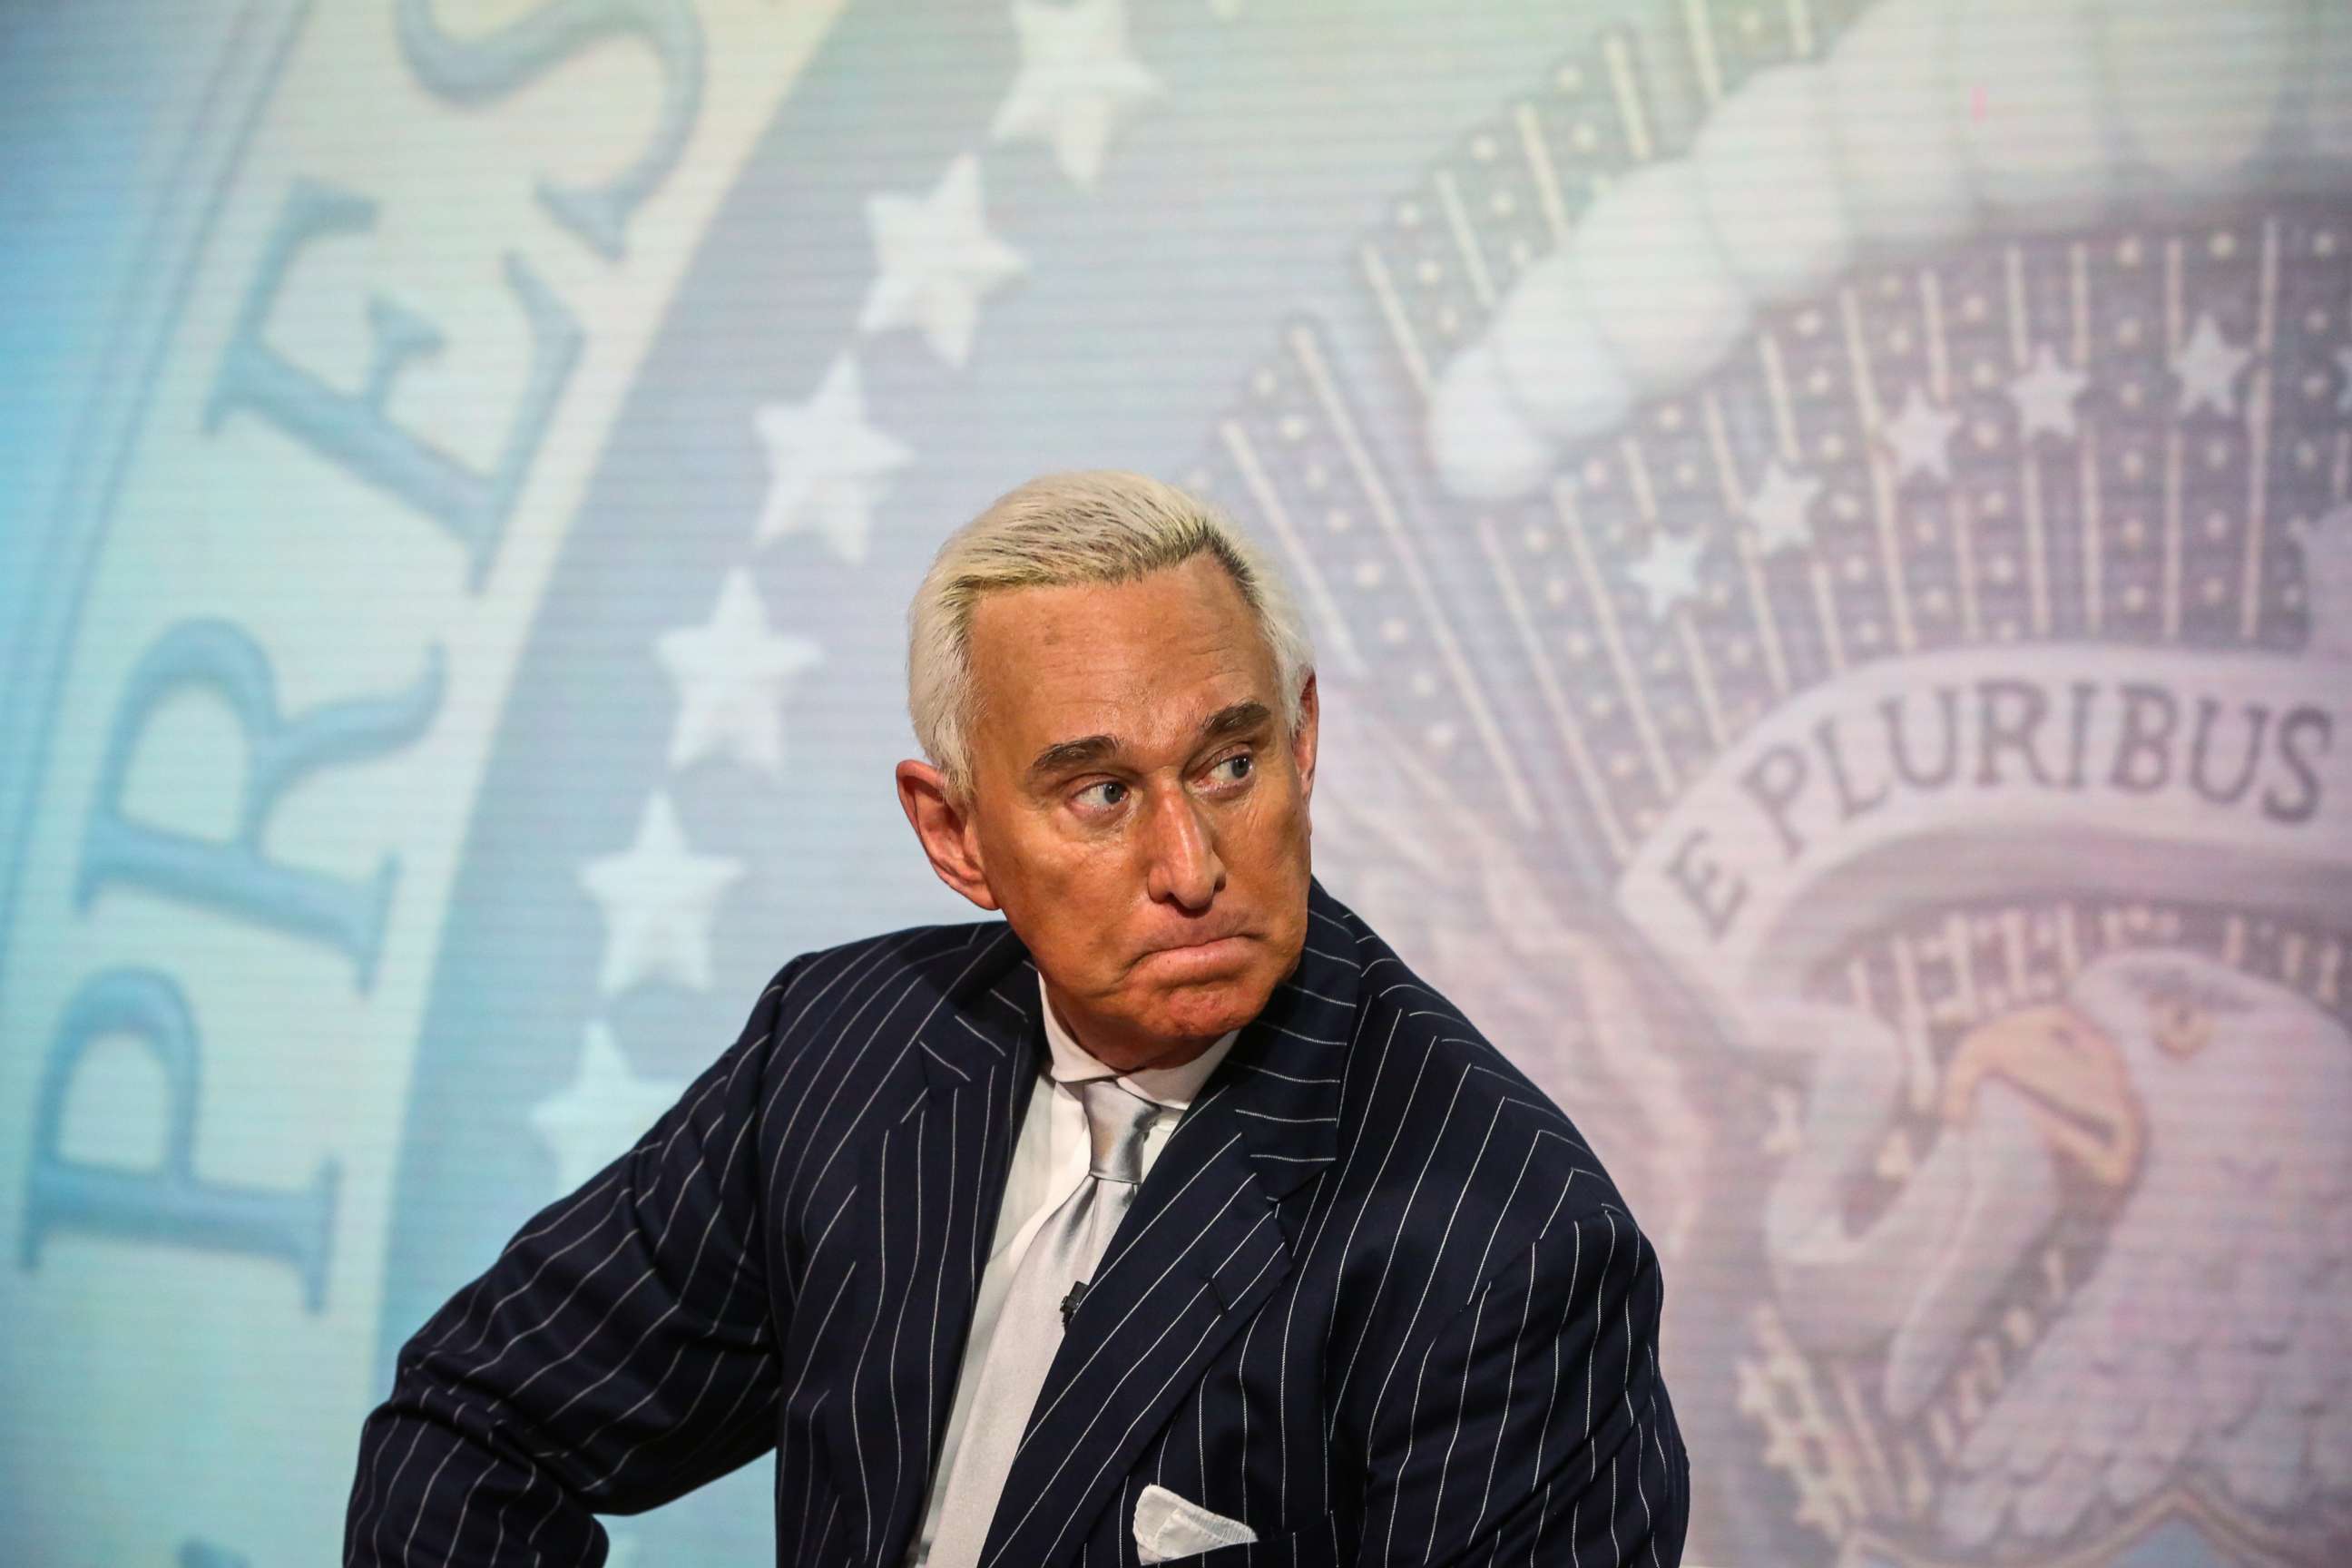 PHOTO: Roger Stone, former adviser to Donald Trump's presidential campaign, listens during a Bloomberg Television interview in New York, May 12, 2017.